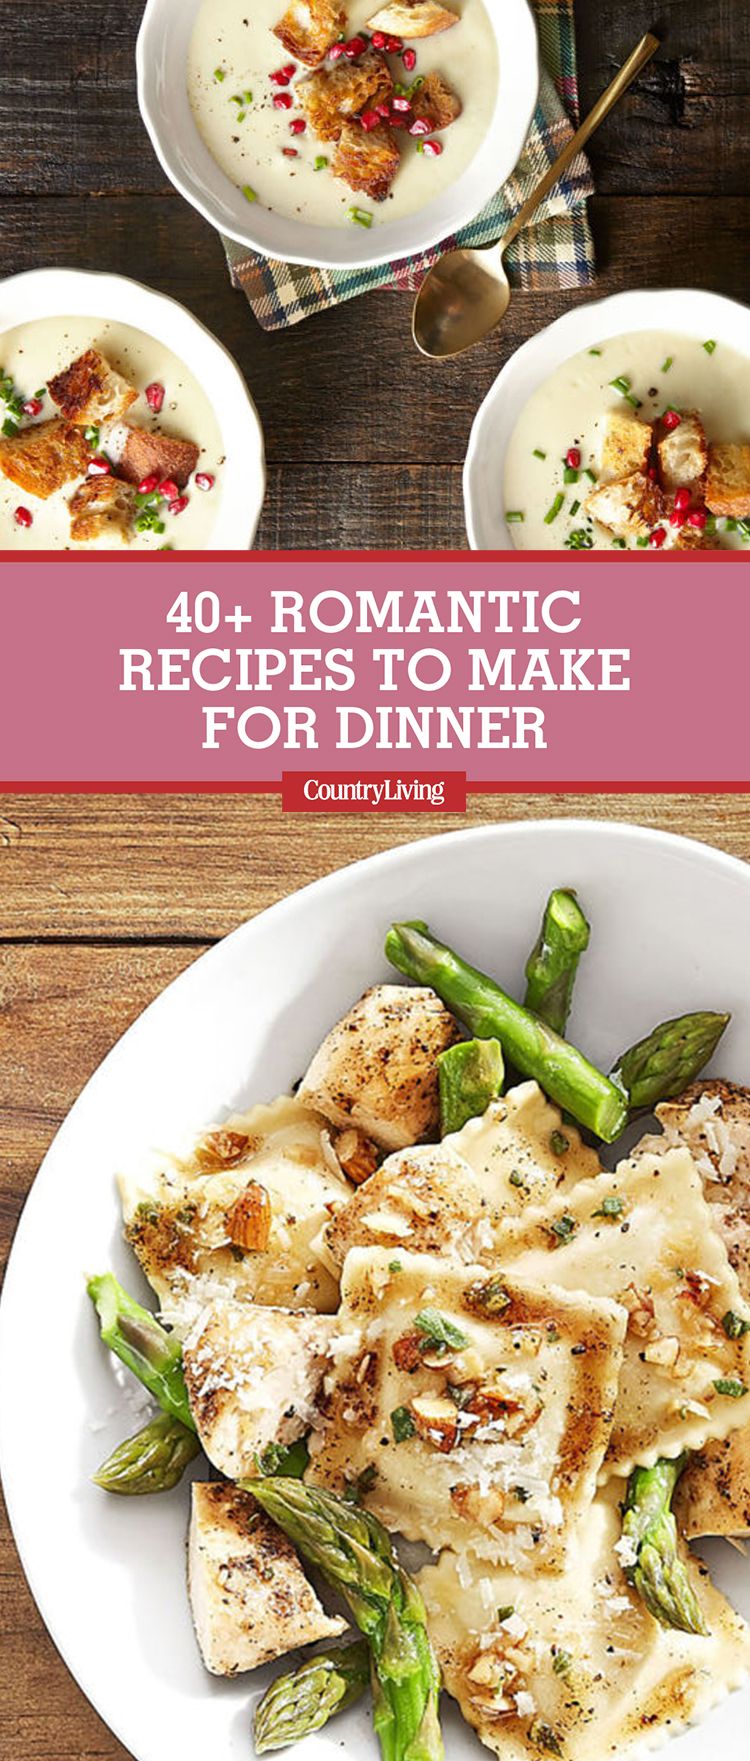 Romantic Dinner Ideas For Him | Examples and Forms